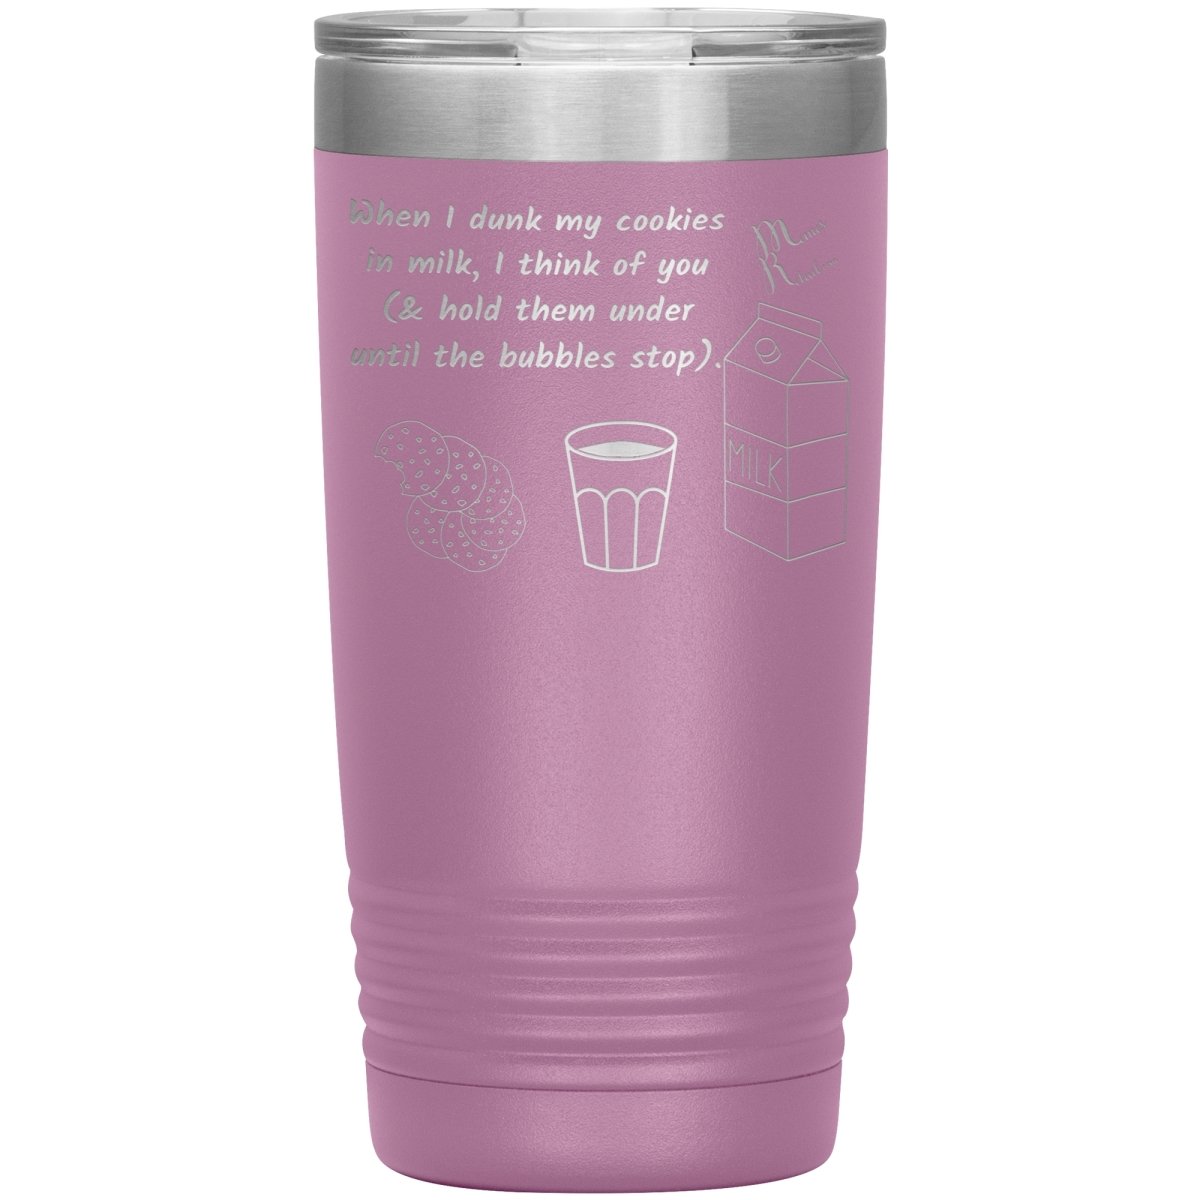 When I dunk My Cookies in Milk, I think of You - Tumblers, 20oz Insulated Tumbler / Light Purple - MemesRetail.com